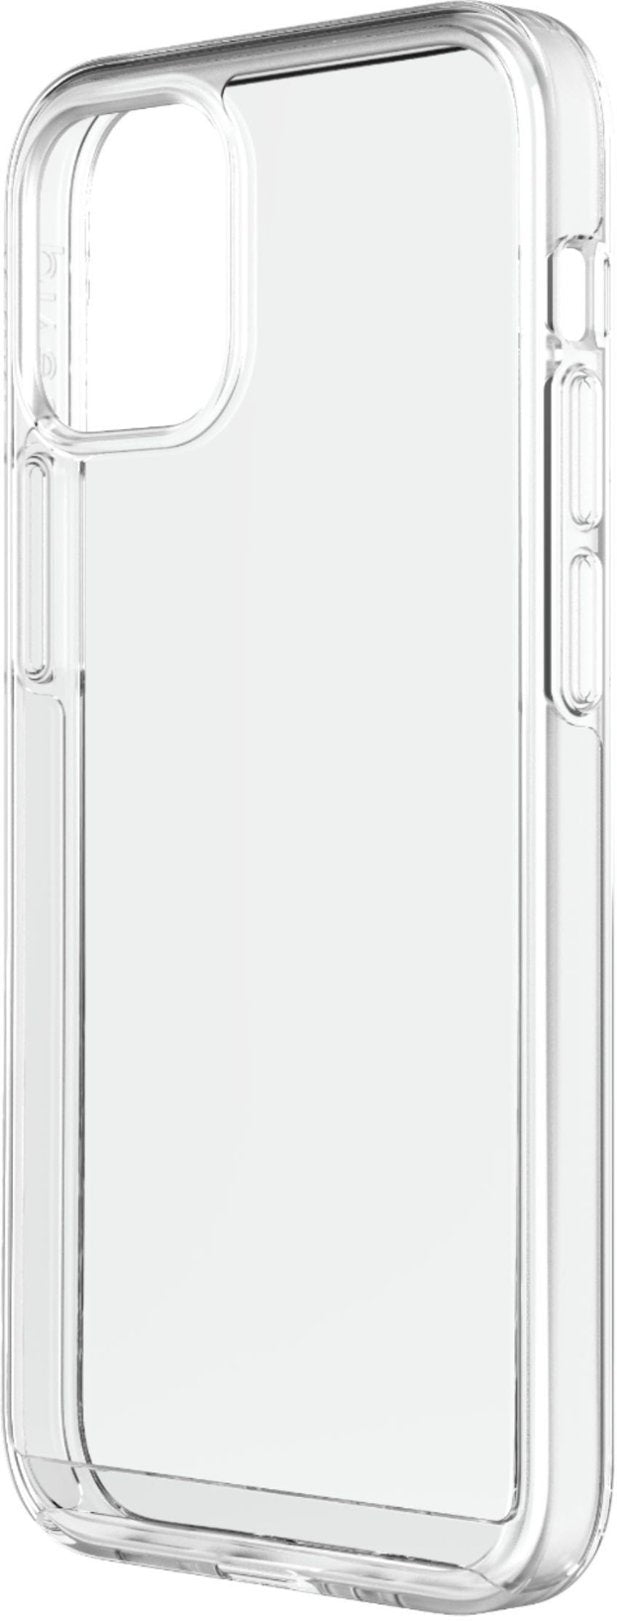 Pivet - 54105BBR Aspect Self-Cycle™ Case for iPhone 12 Mini - CLEAR